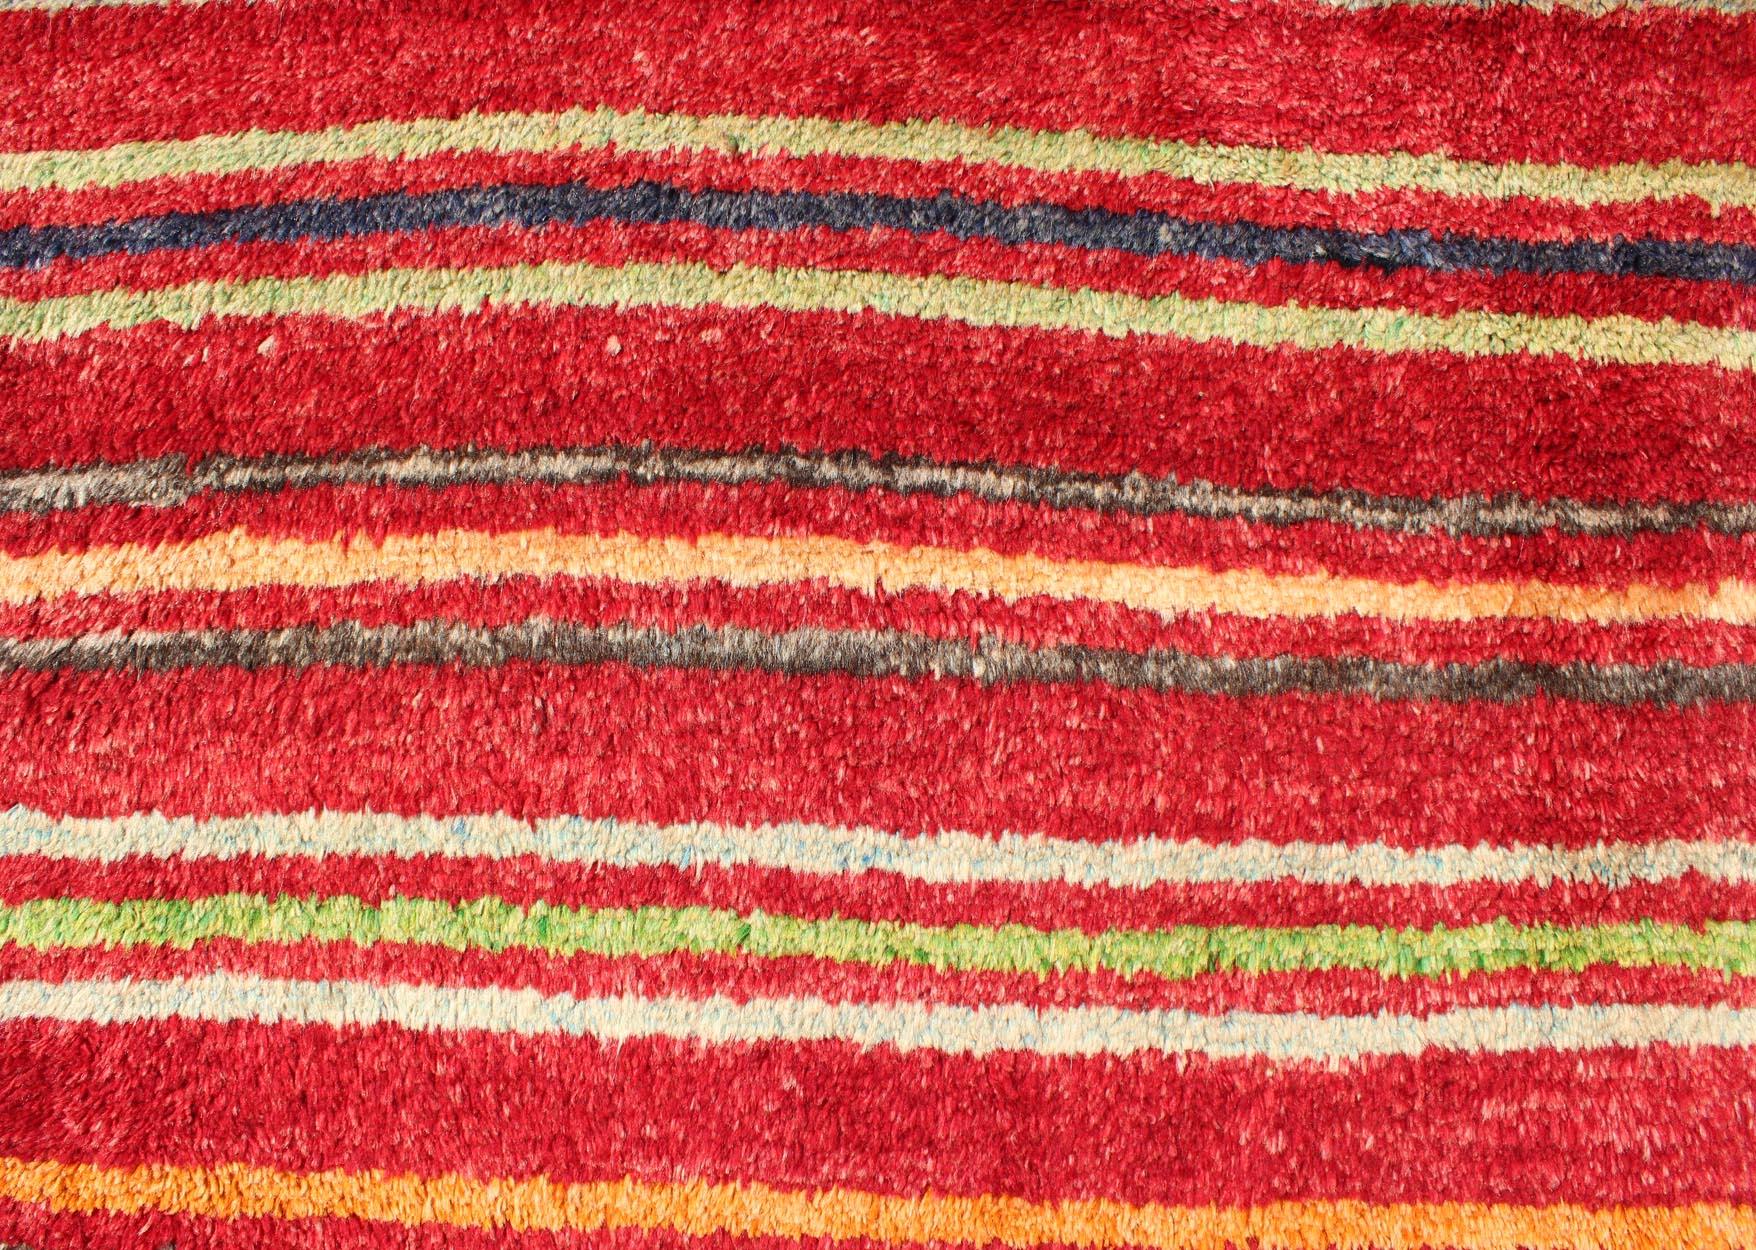 Wool Turkish Tulu Carpet with Colorful Striped Pattern in Red, Orange, Blue, Green For Sale